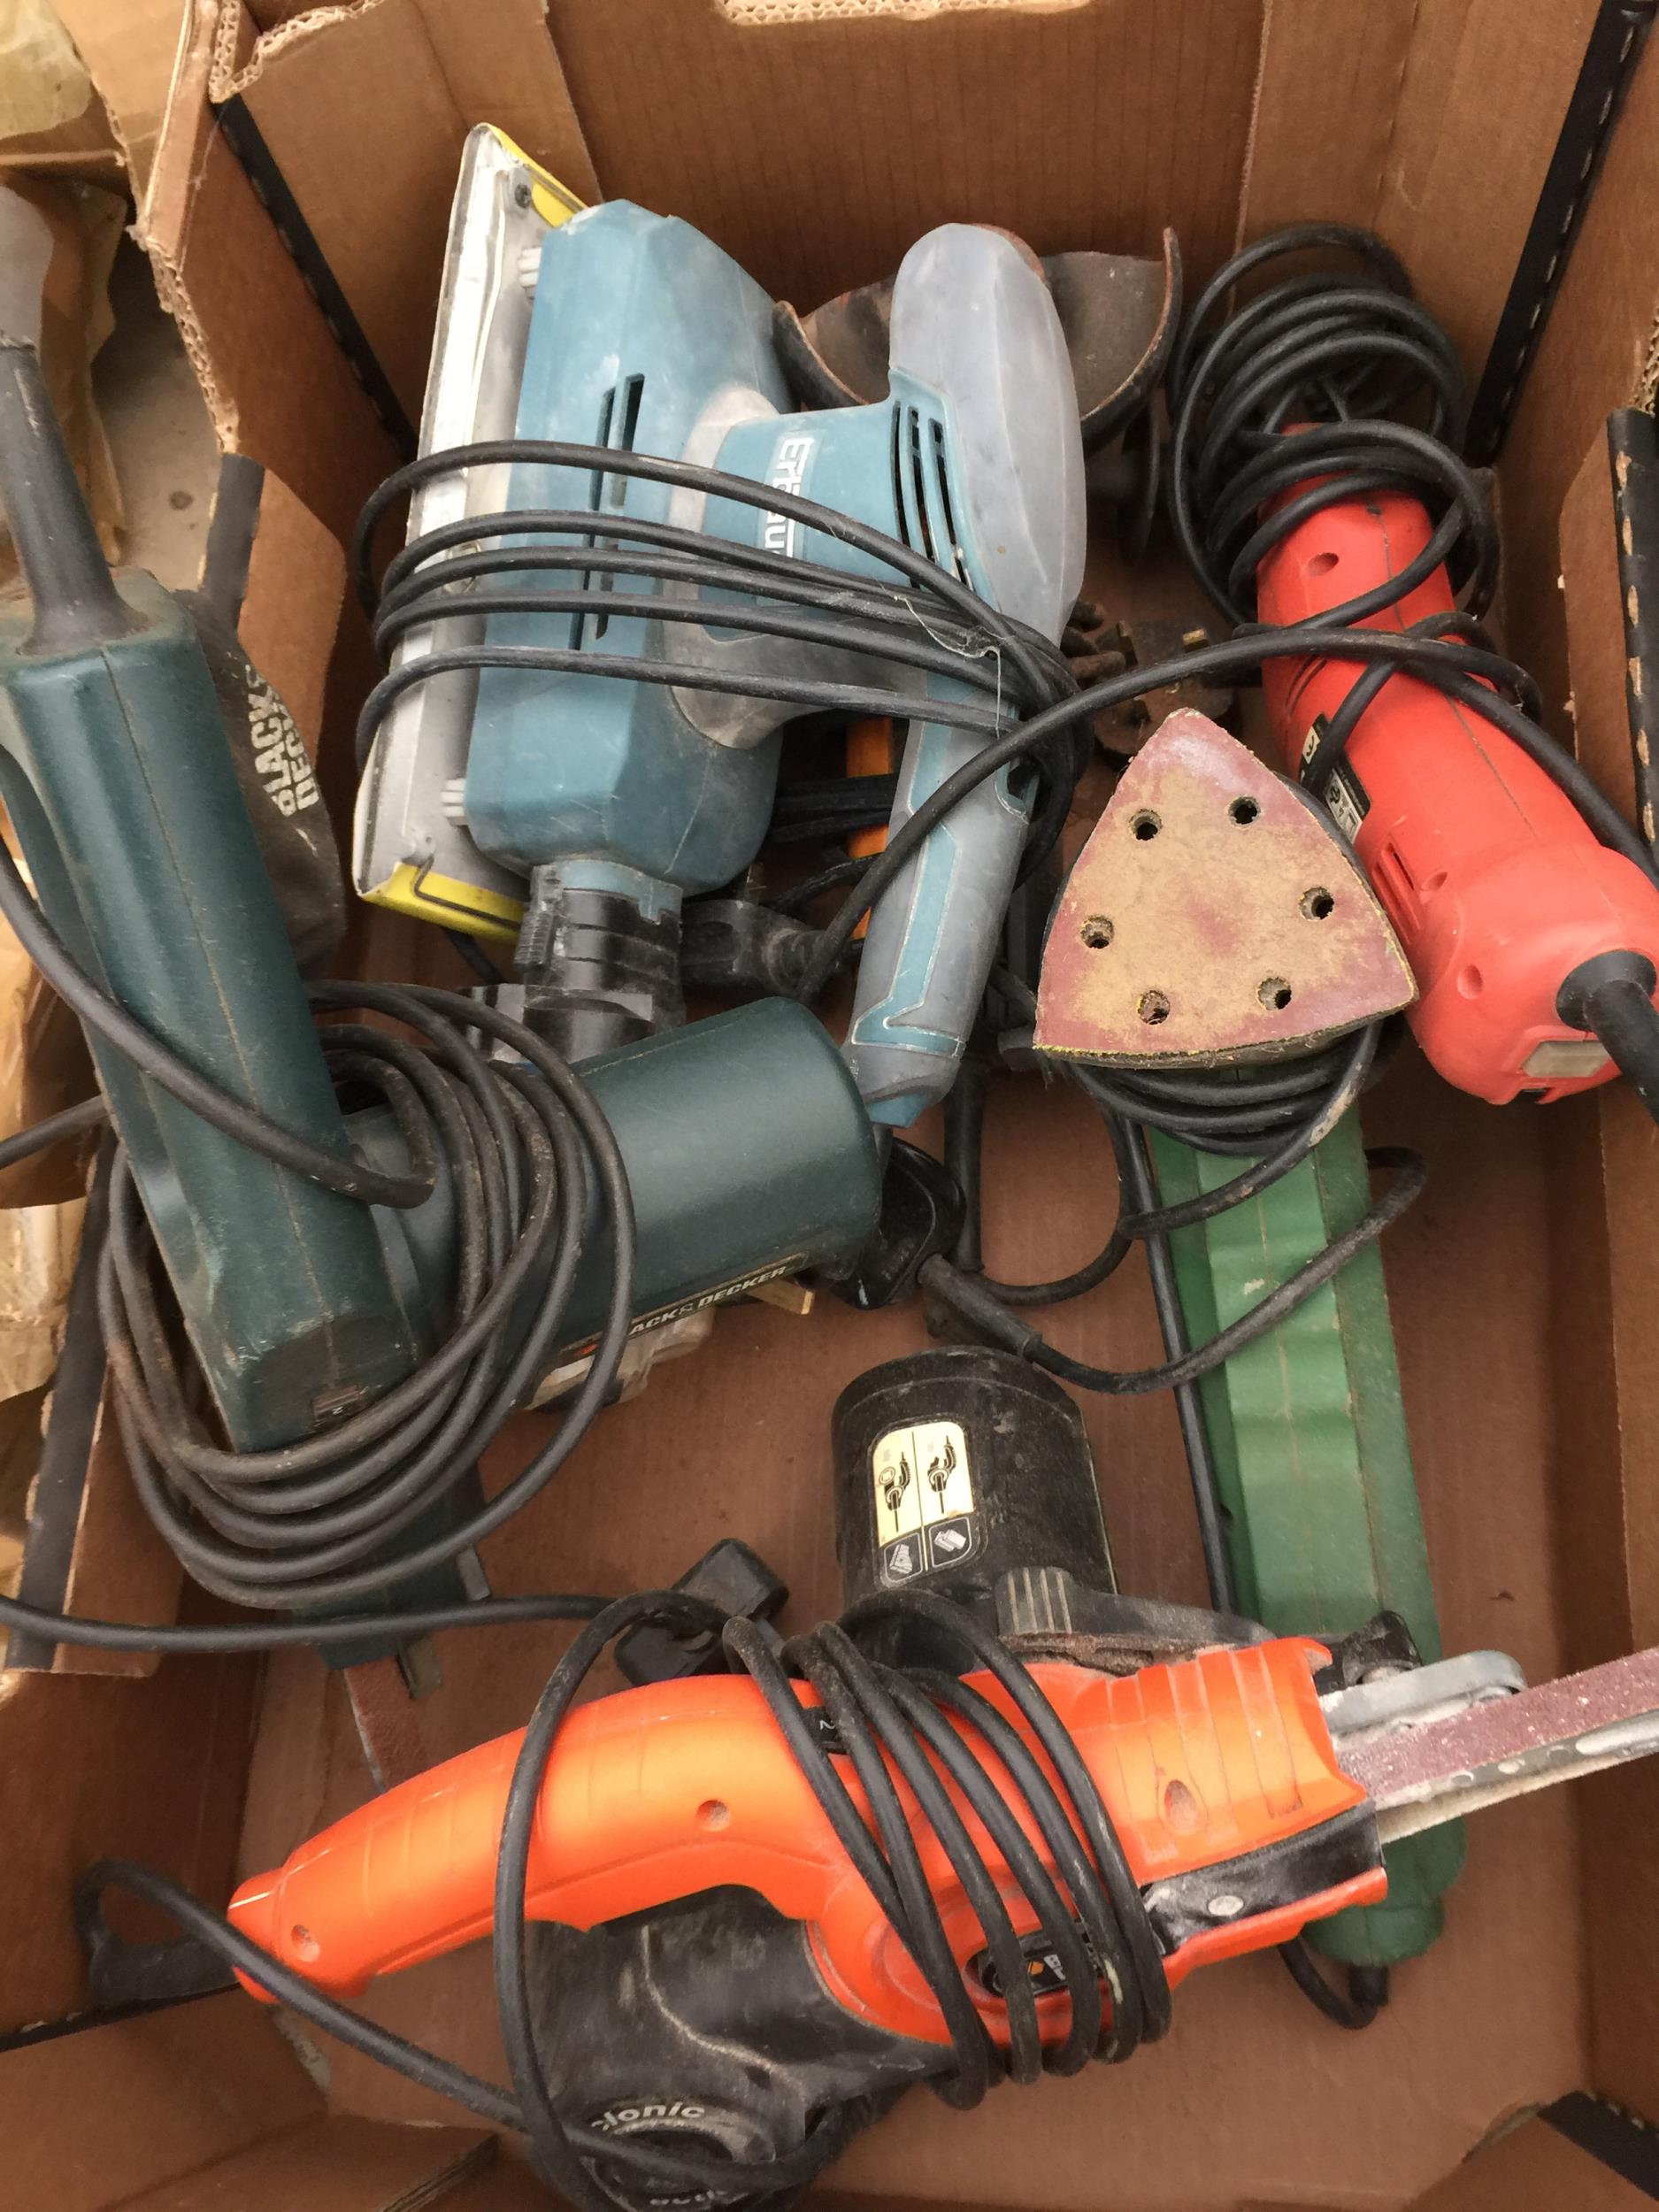 AN ASSORTMENT OF VARIOUS POWER TOOLS TO INCLUDE AN EINHILL GRINDER, ERBUAR SANDER, AND VARIOUS - Image 3 of 3